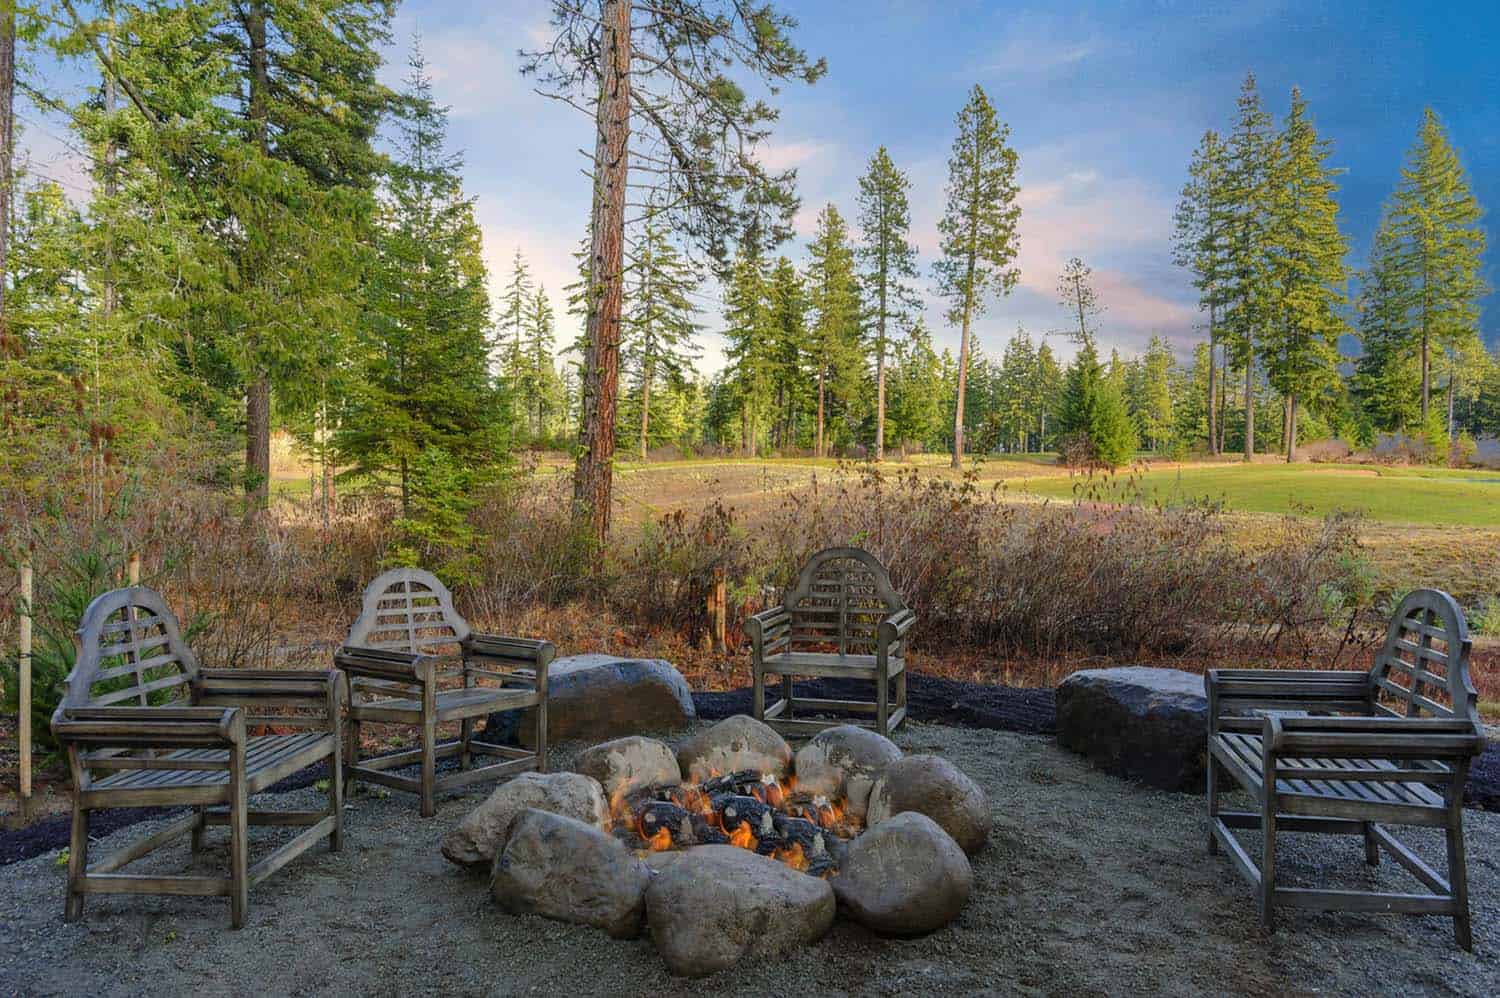 28 Inspiring Fire Pit Ideas To Create A, Rustic Fire Pit